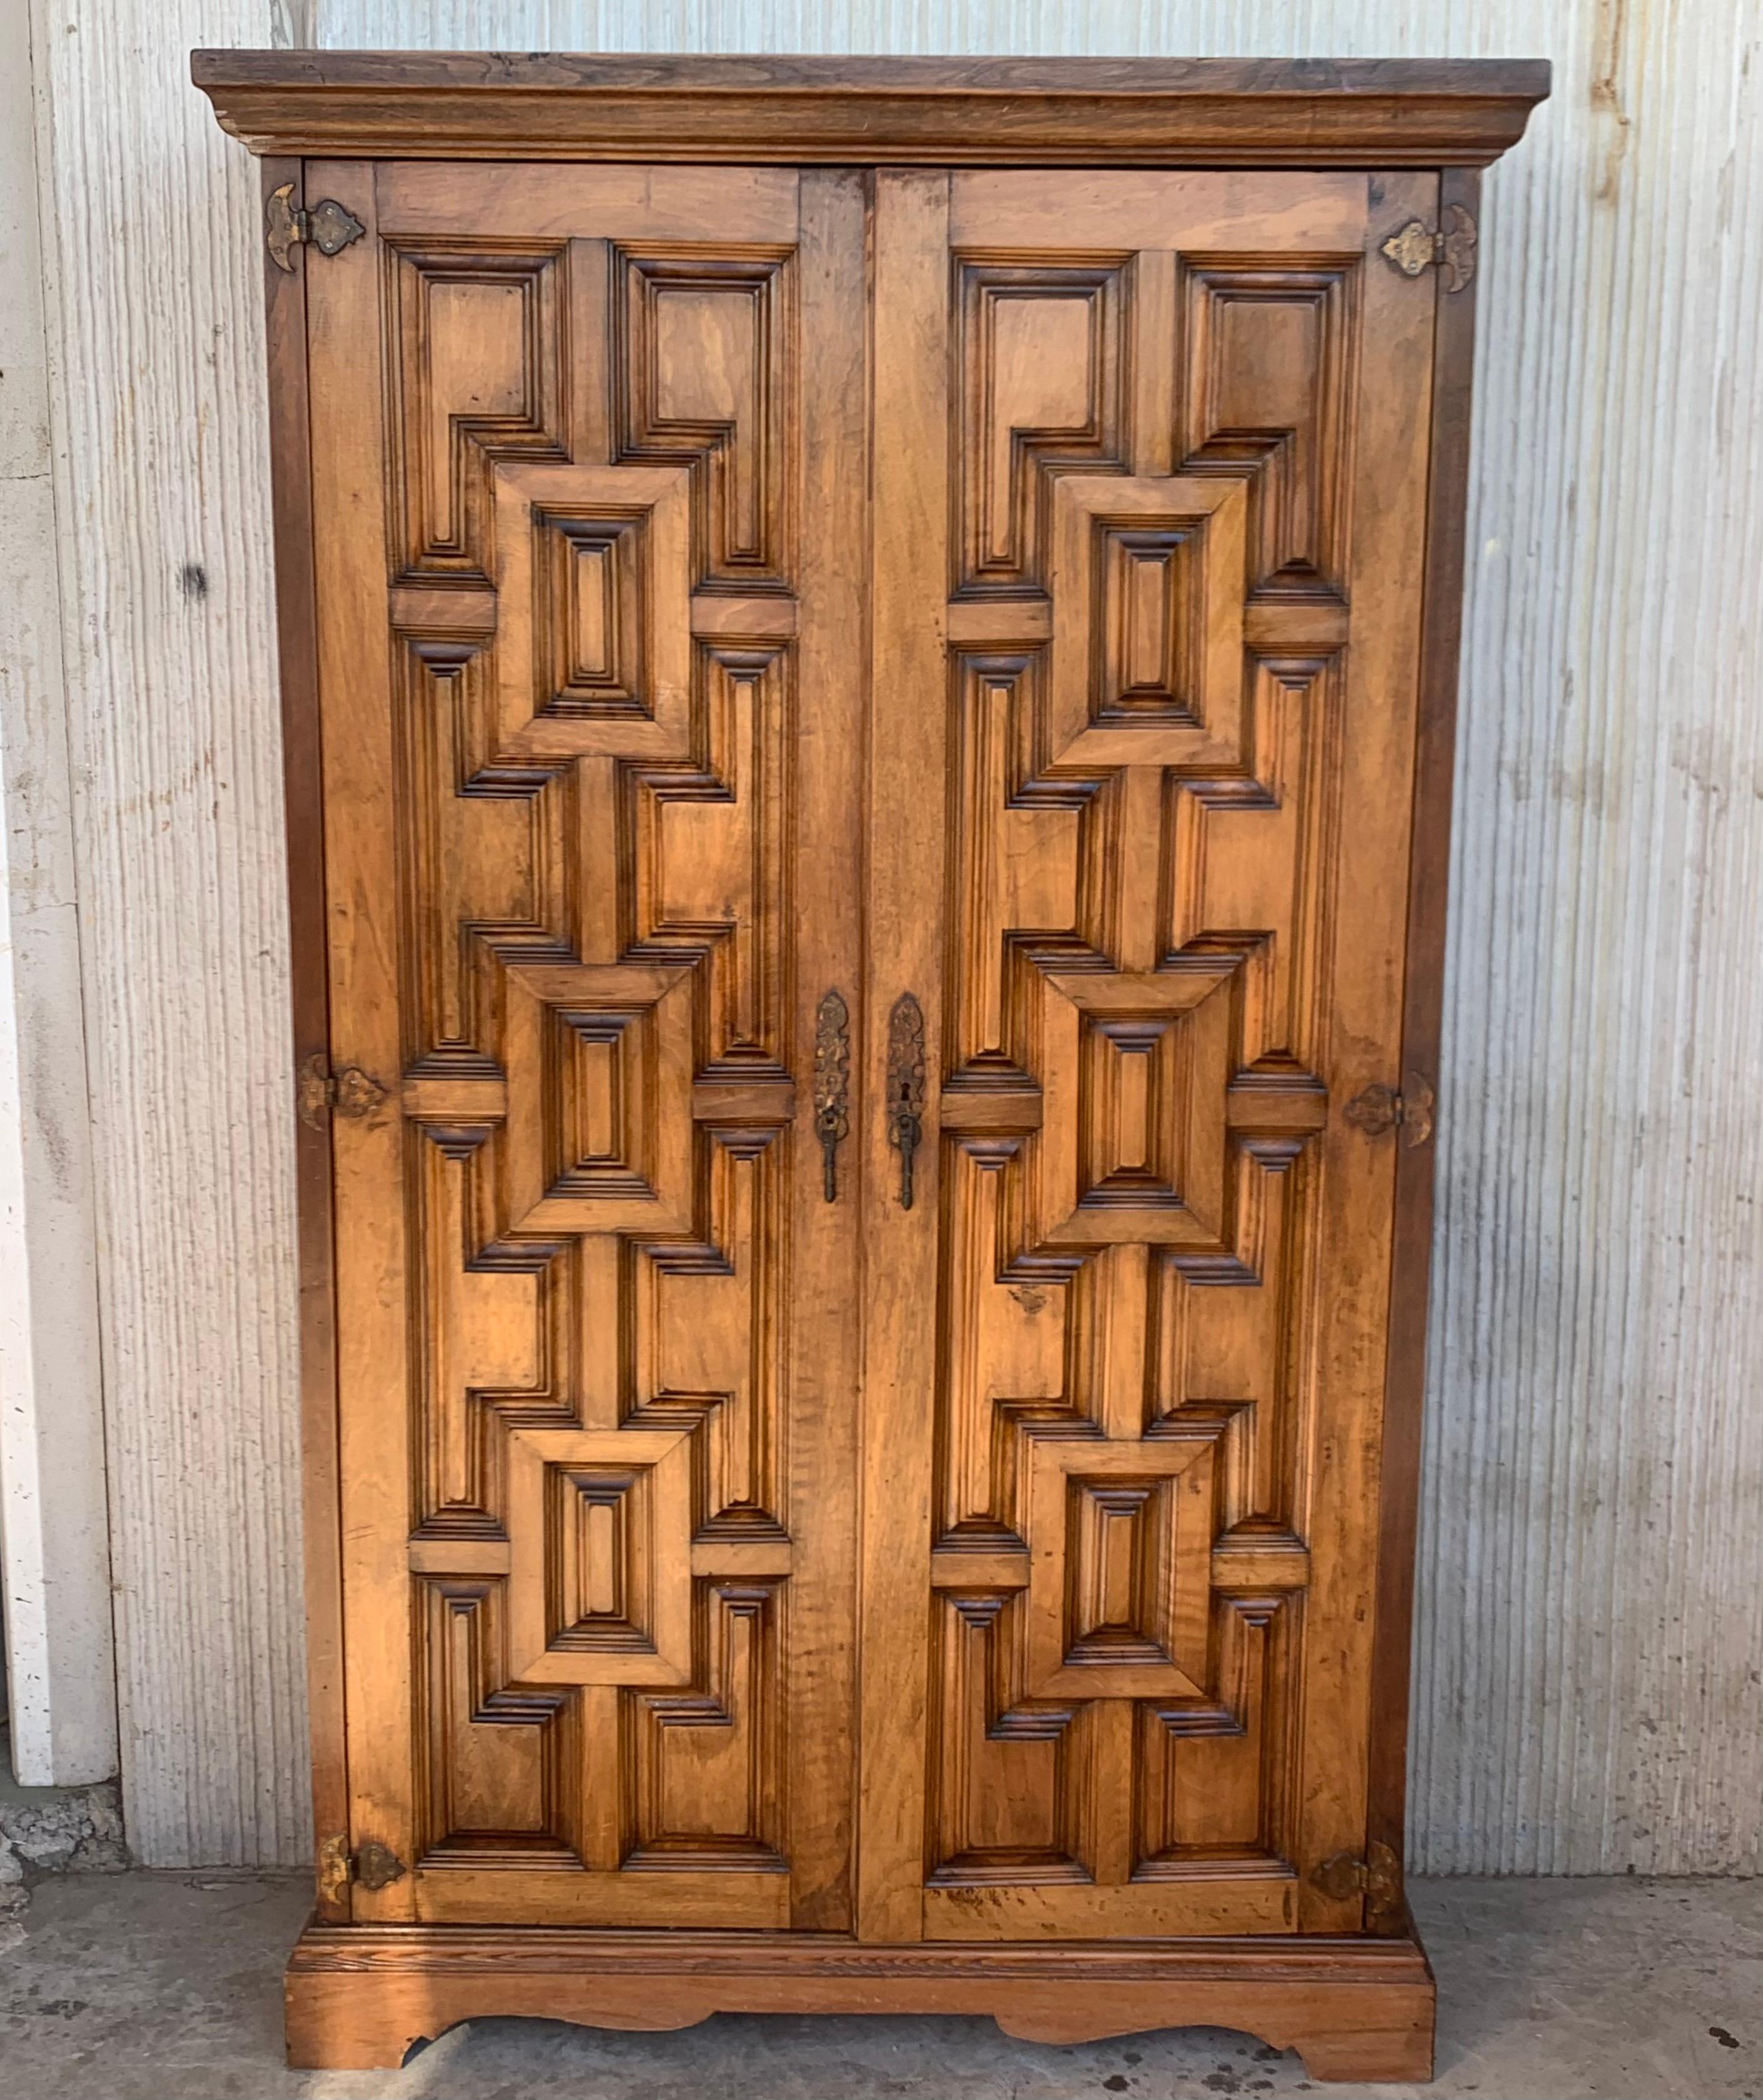 Armoire, cupboard or kitchen cabinet with two doors decorated to the outside with geometric patterns framed by moldings. The legs that protrude below and the cresting and lower molding provide the characteristic curved lines in this period. The